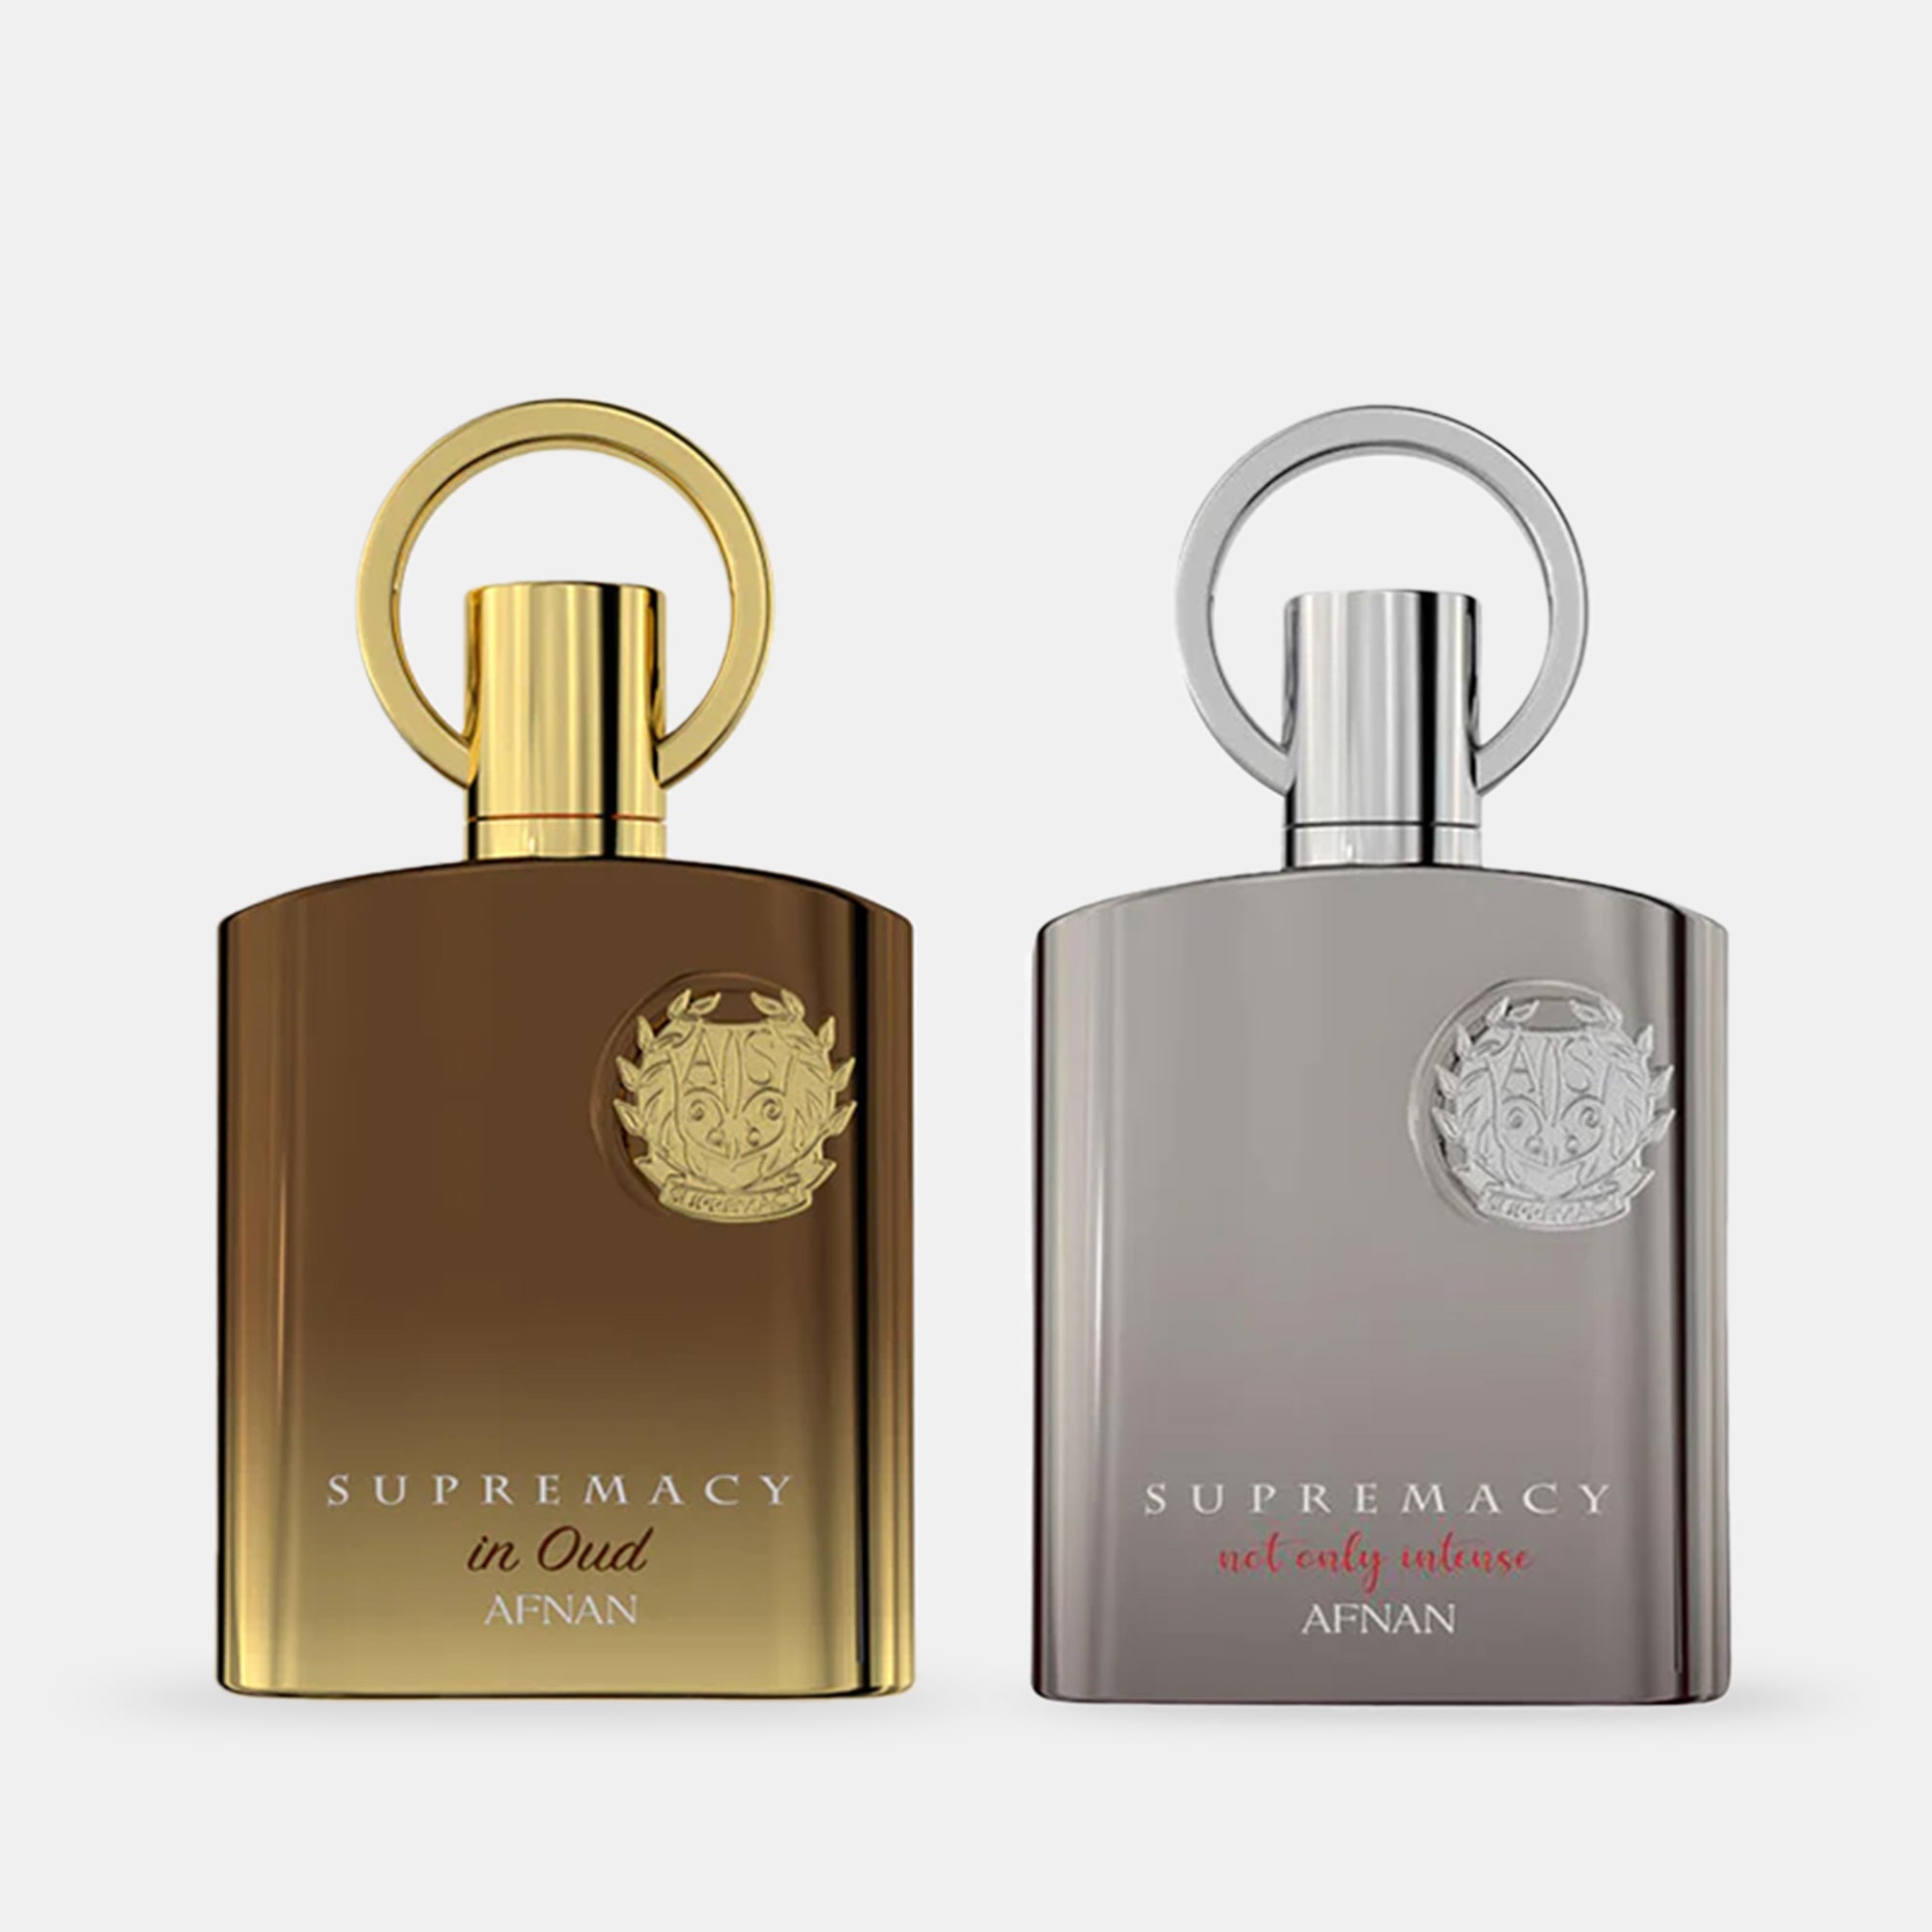 Afnan Supremacy Not Only Intense & Supremacy In Oud Bundle